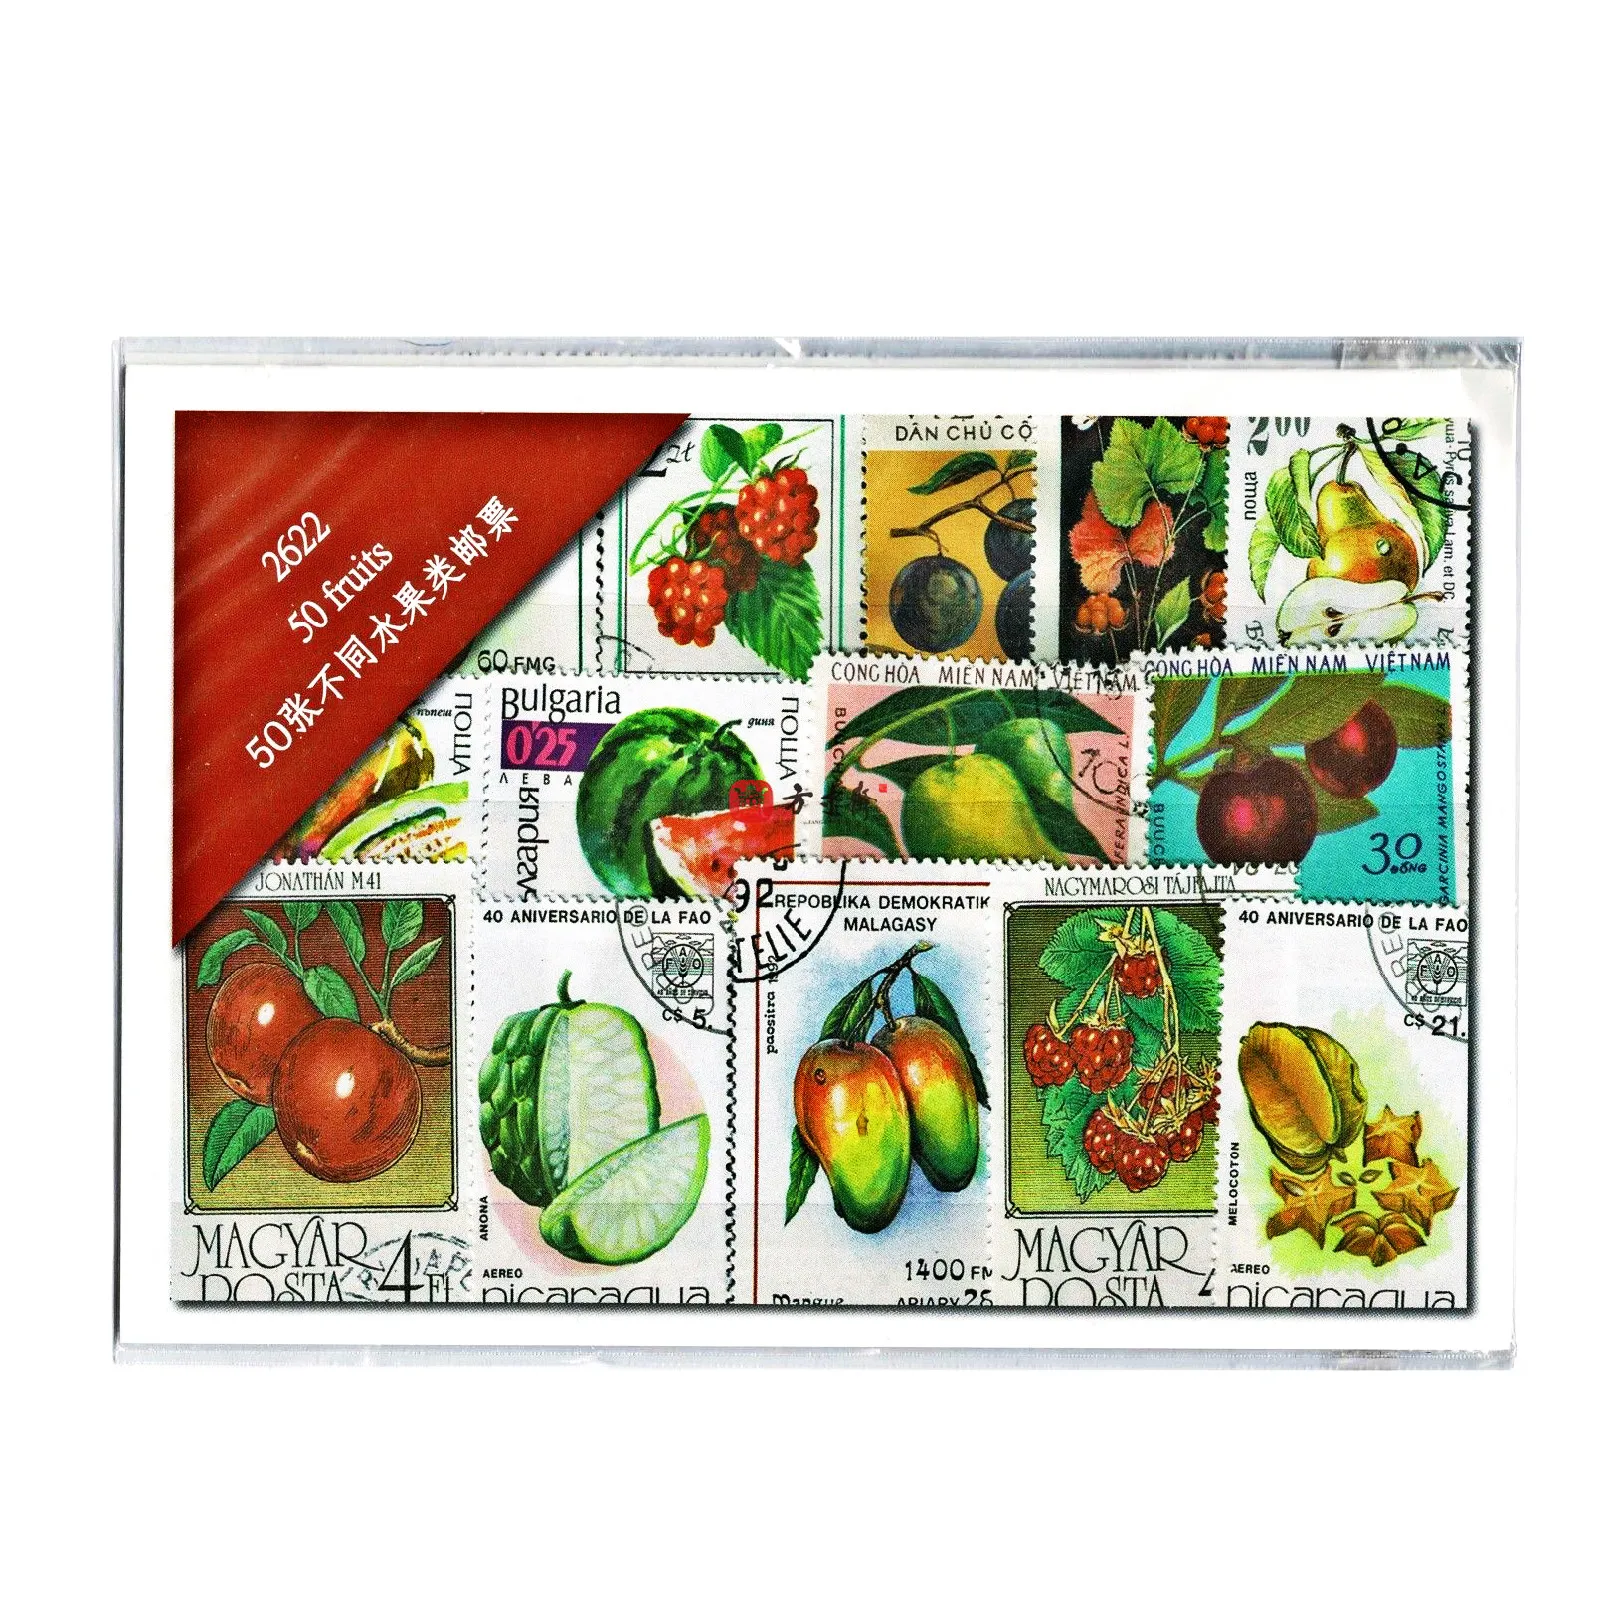 

50 PCS,Fruit Stamps,Used with Post Mark,,High Quality,Real Original Collection,Set Lot